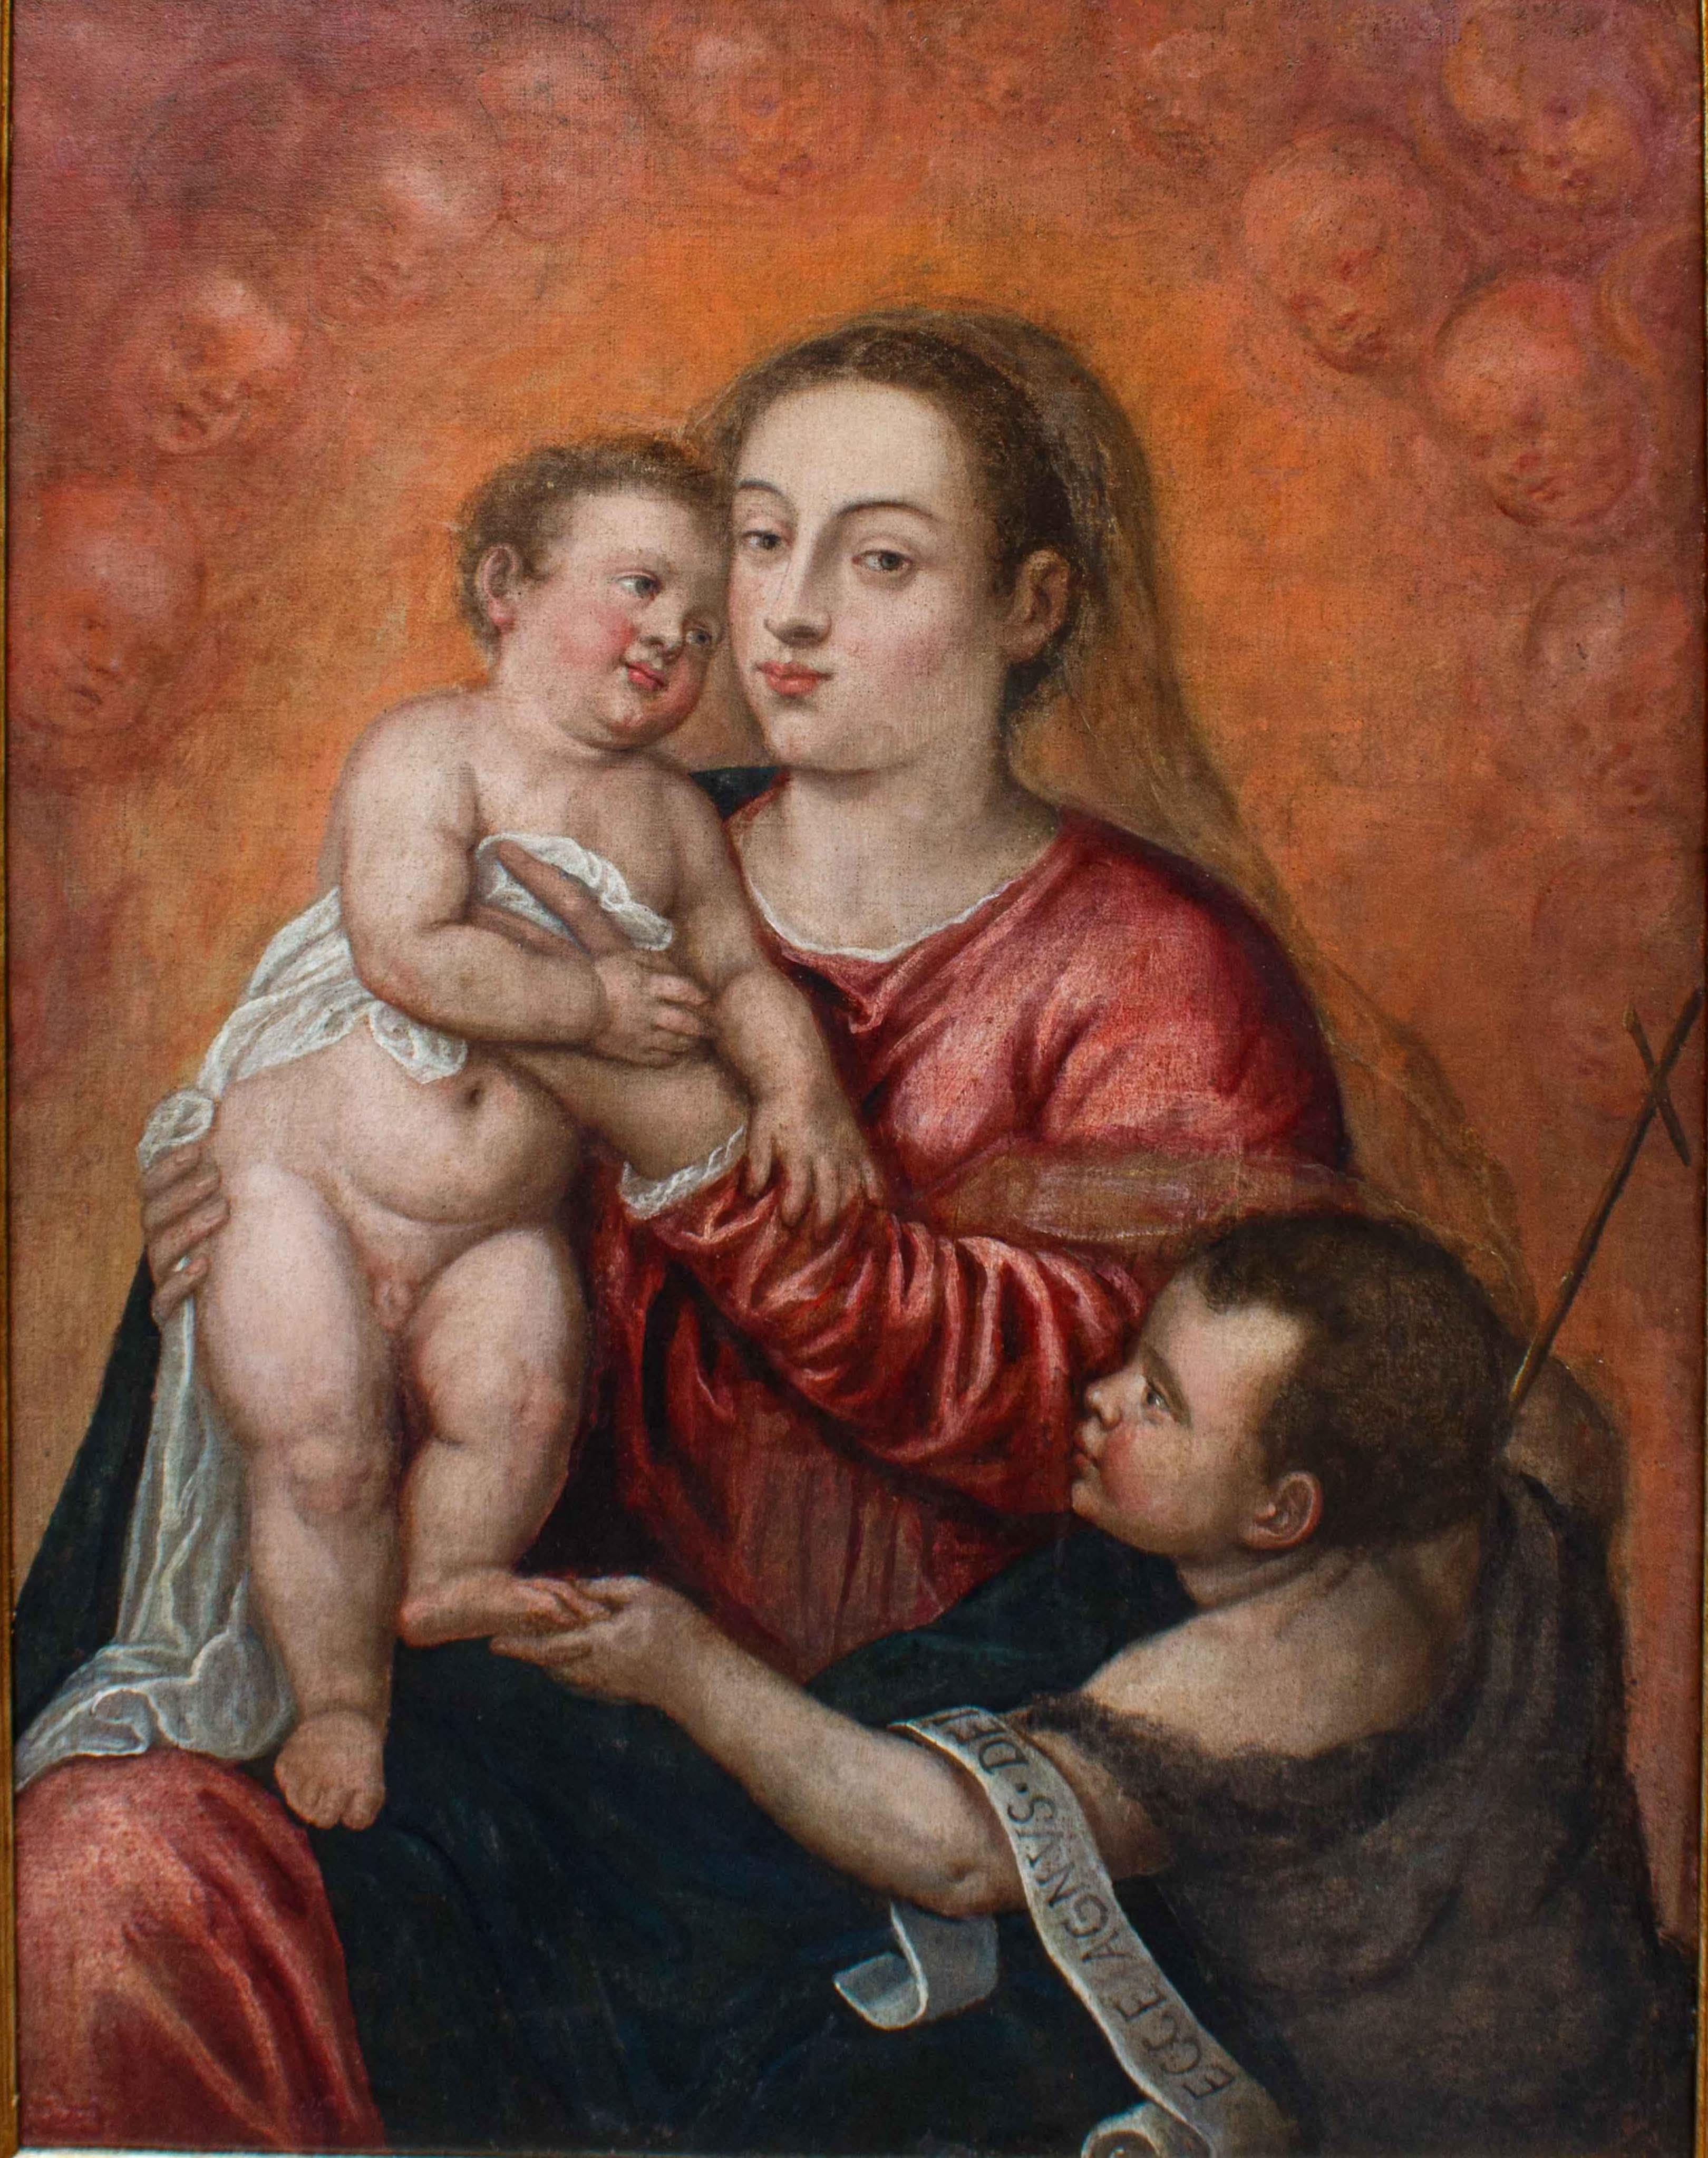 School of Titian, (Pieve di Cadore, 1488/1490 - Venice, 1576)

Madonna with Child and San Giovannino

Oil on canvas, 105 x 78 cm

The work under consideration depicts a half-figure of the Madonna holding the Child Jesus, who tenderly rests his head